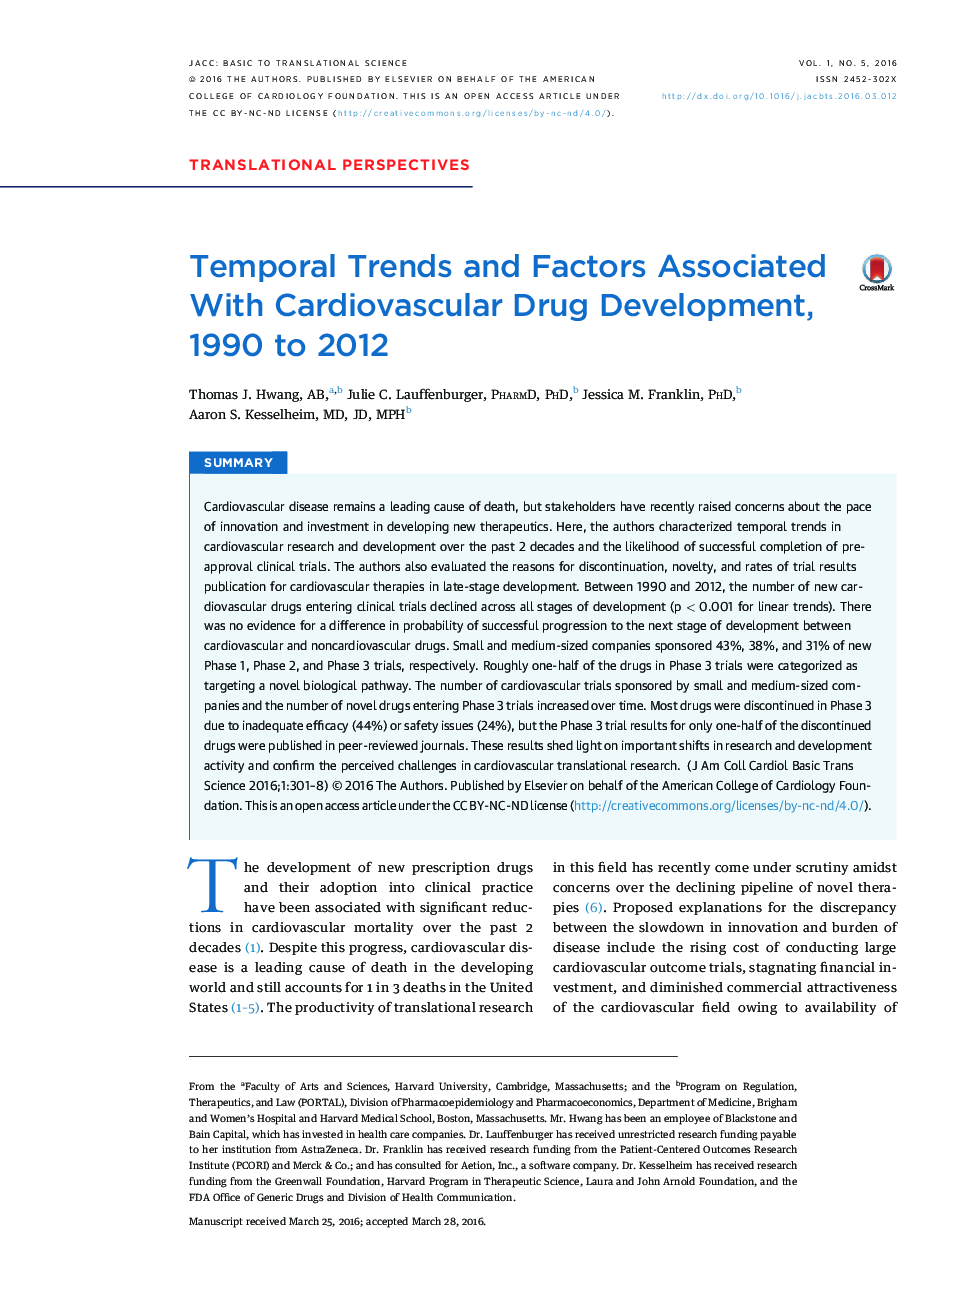 Temporal Trends and Factors Associated With Cardiovascular Drug Development, 1990 to 2012 